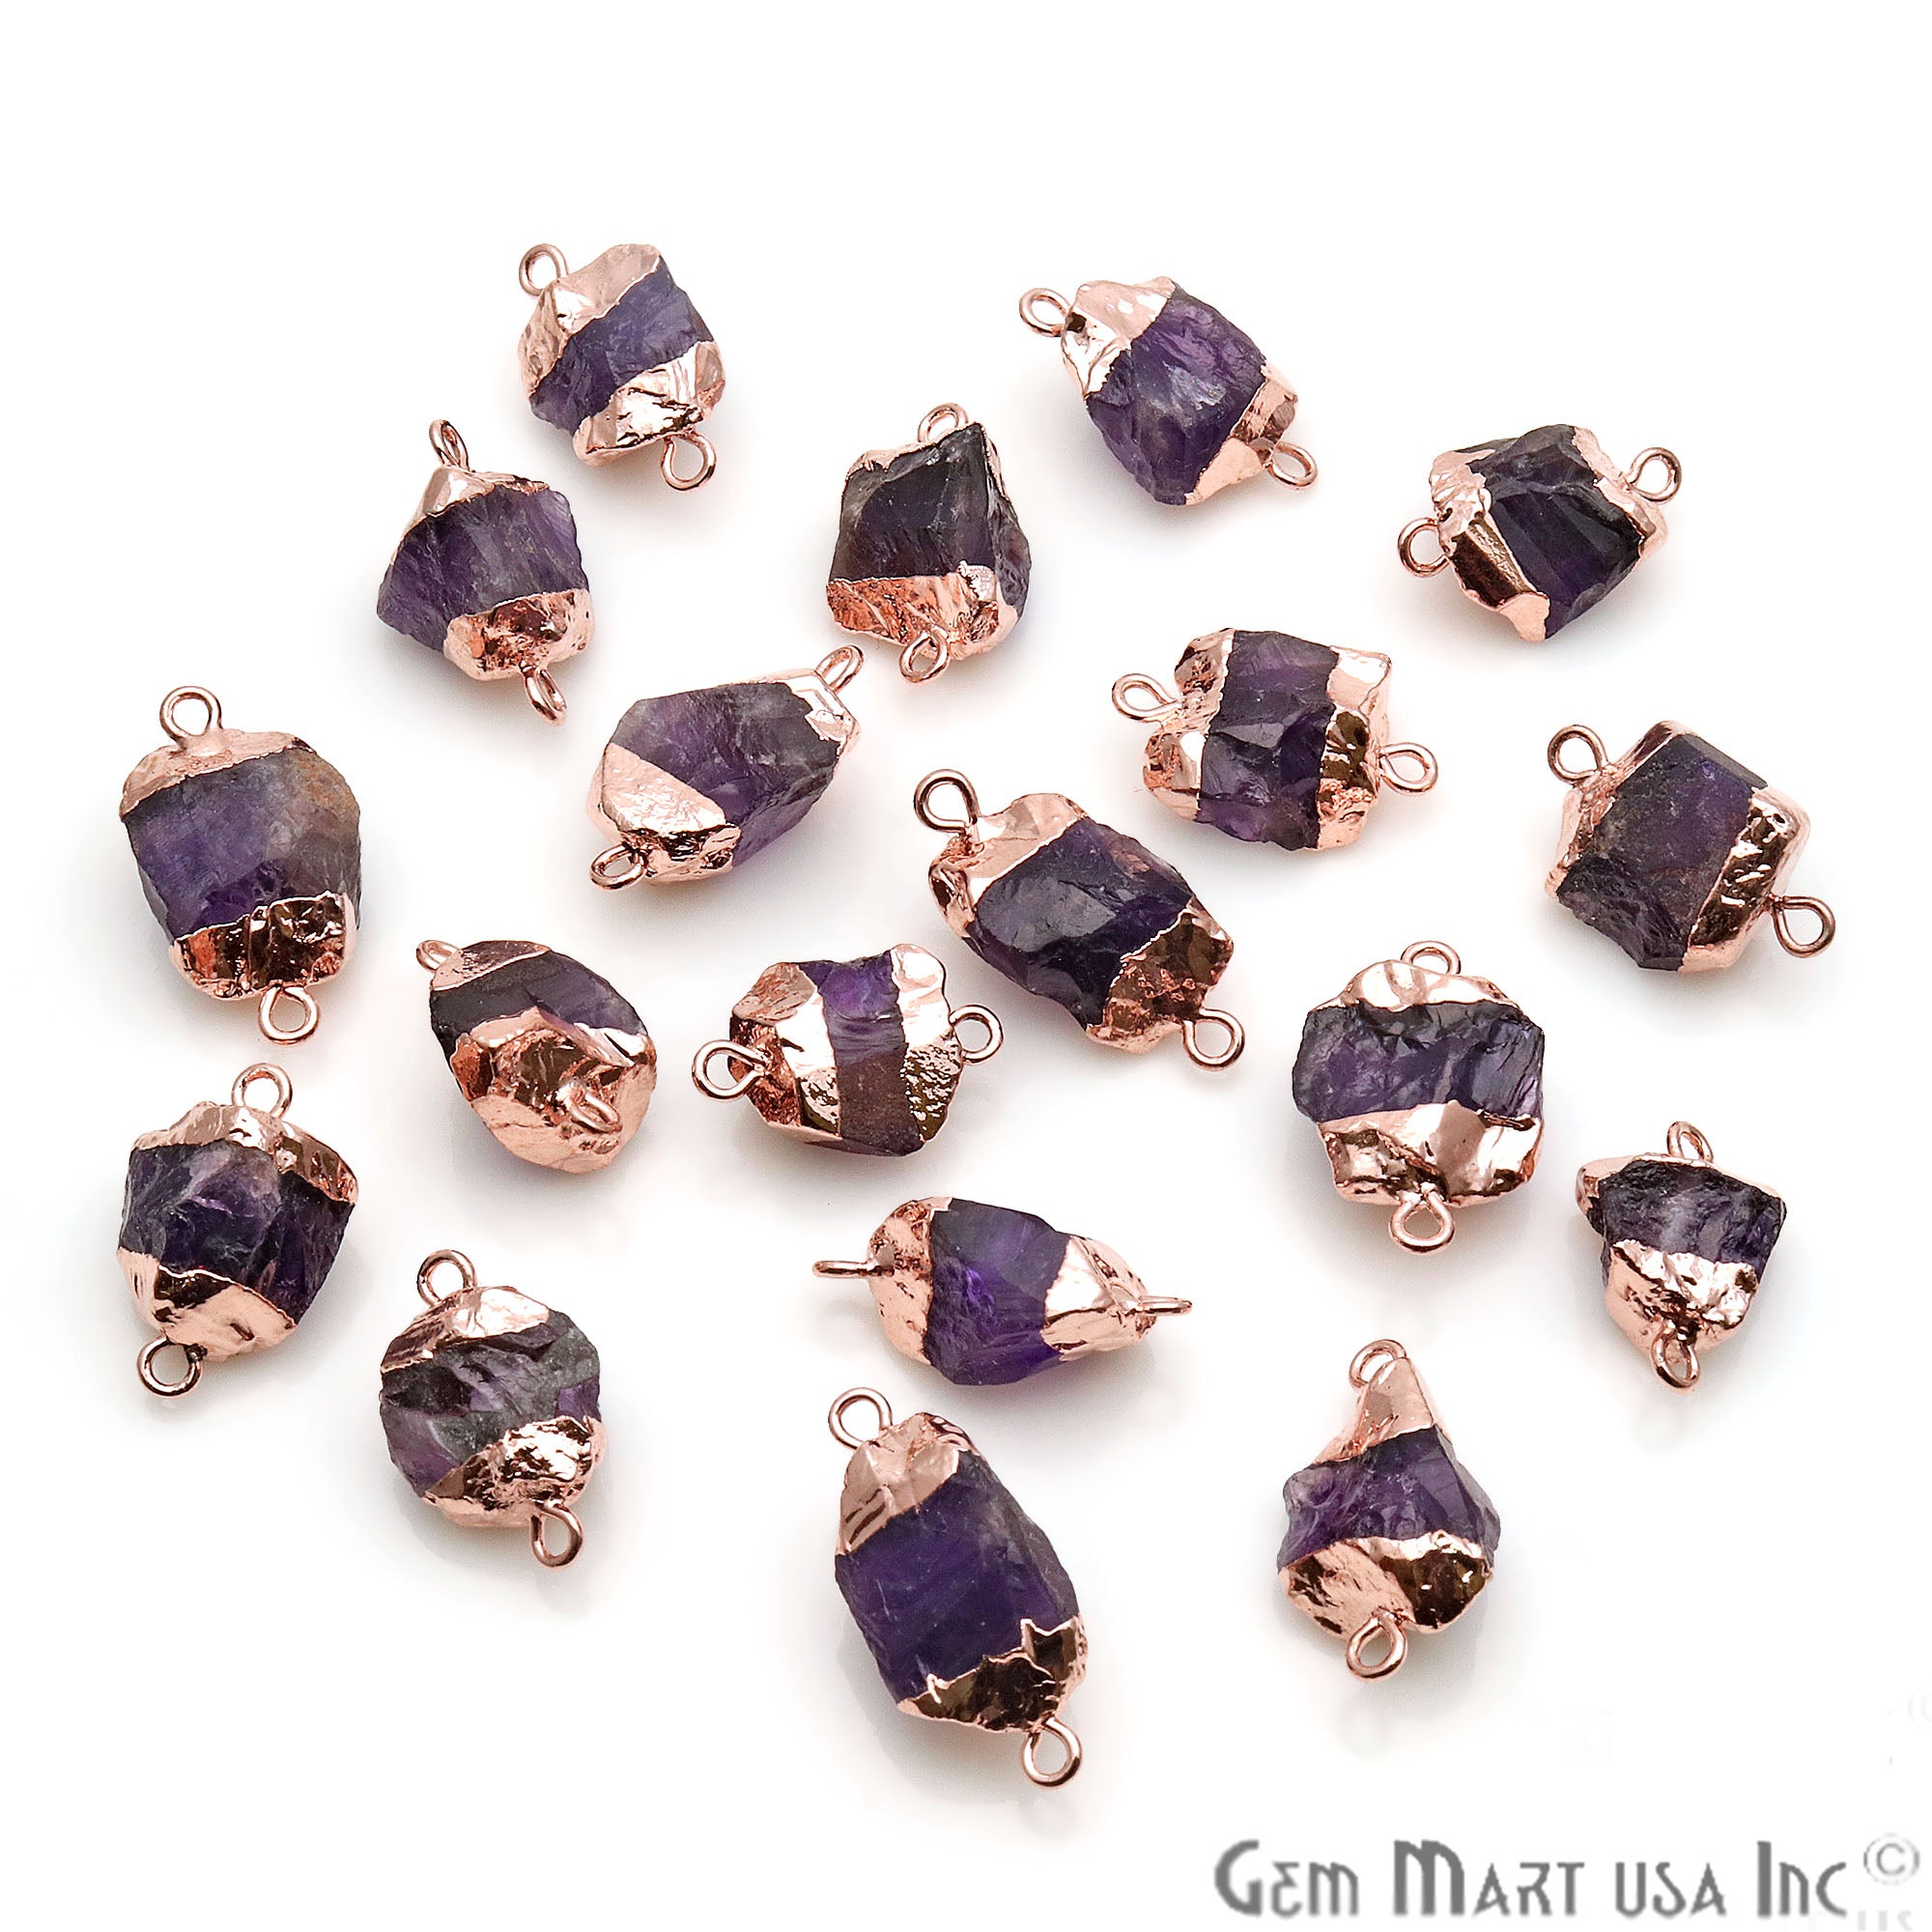 Rough Amethyst Organic 23x12mm Rose Gold Electroplated Pendant Connector - GemMartUSA